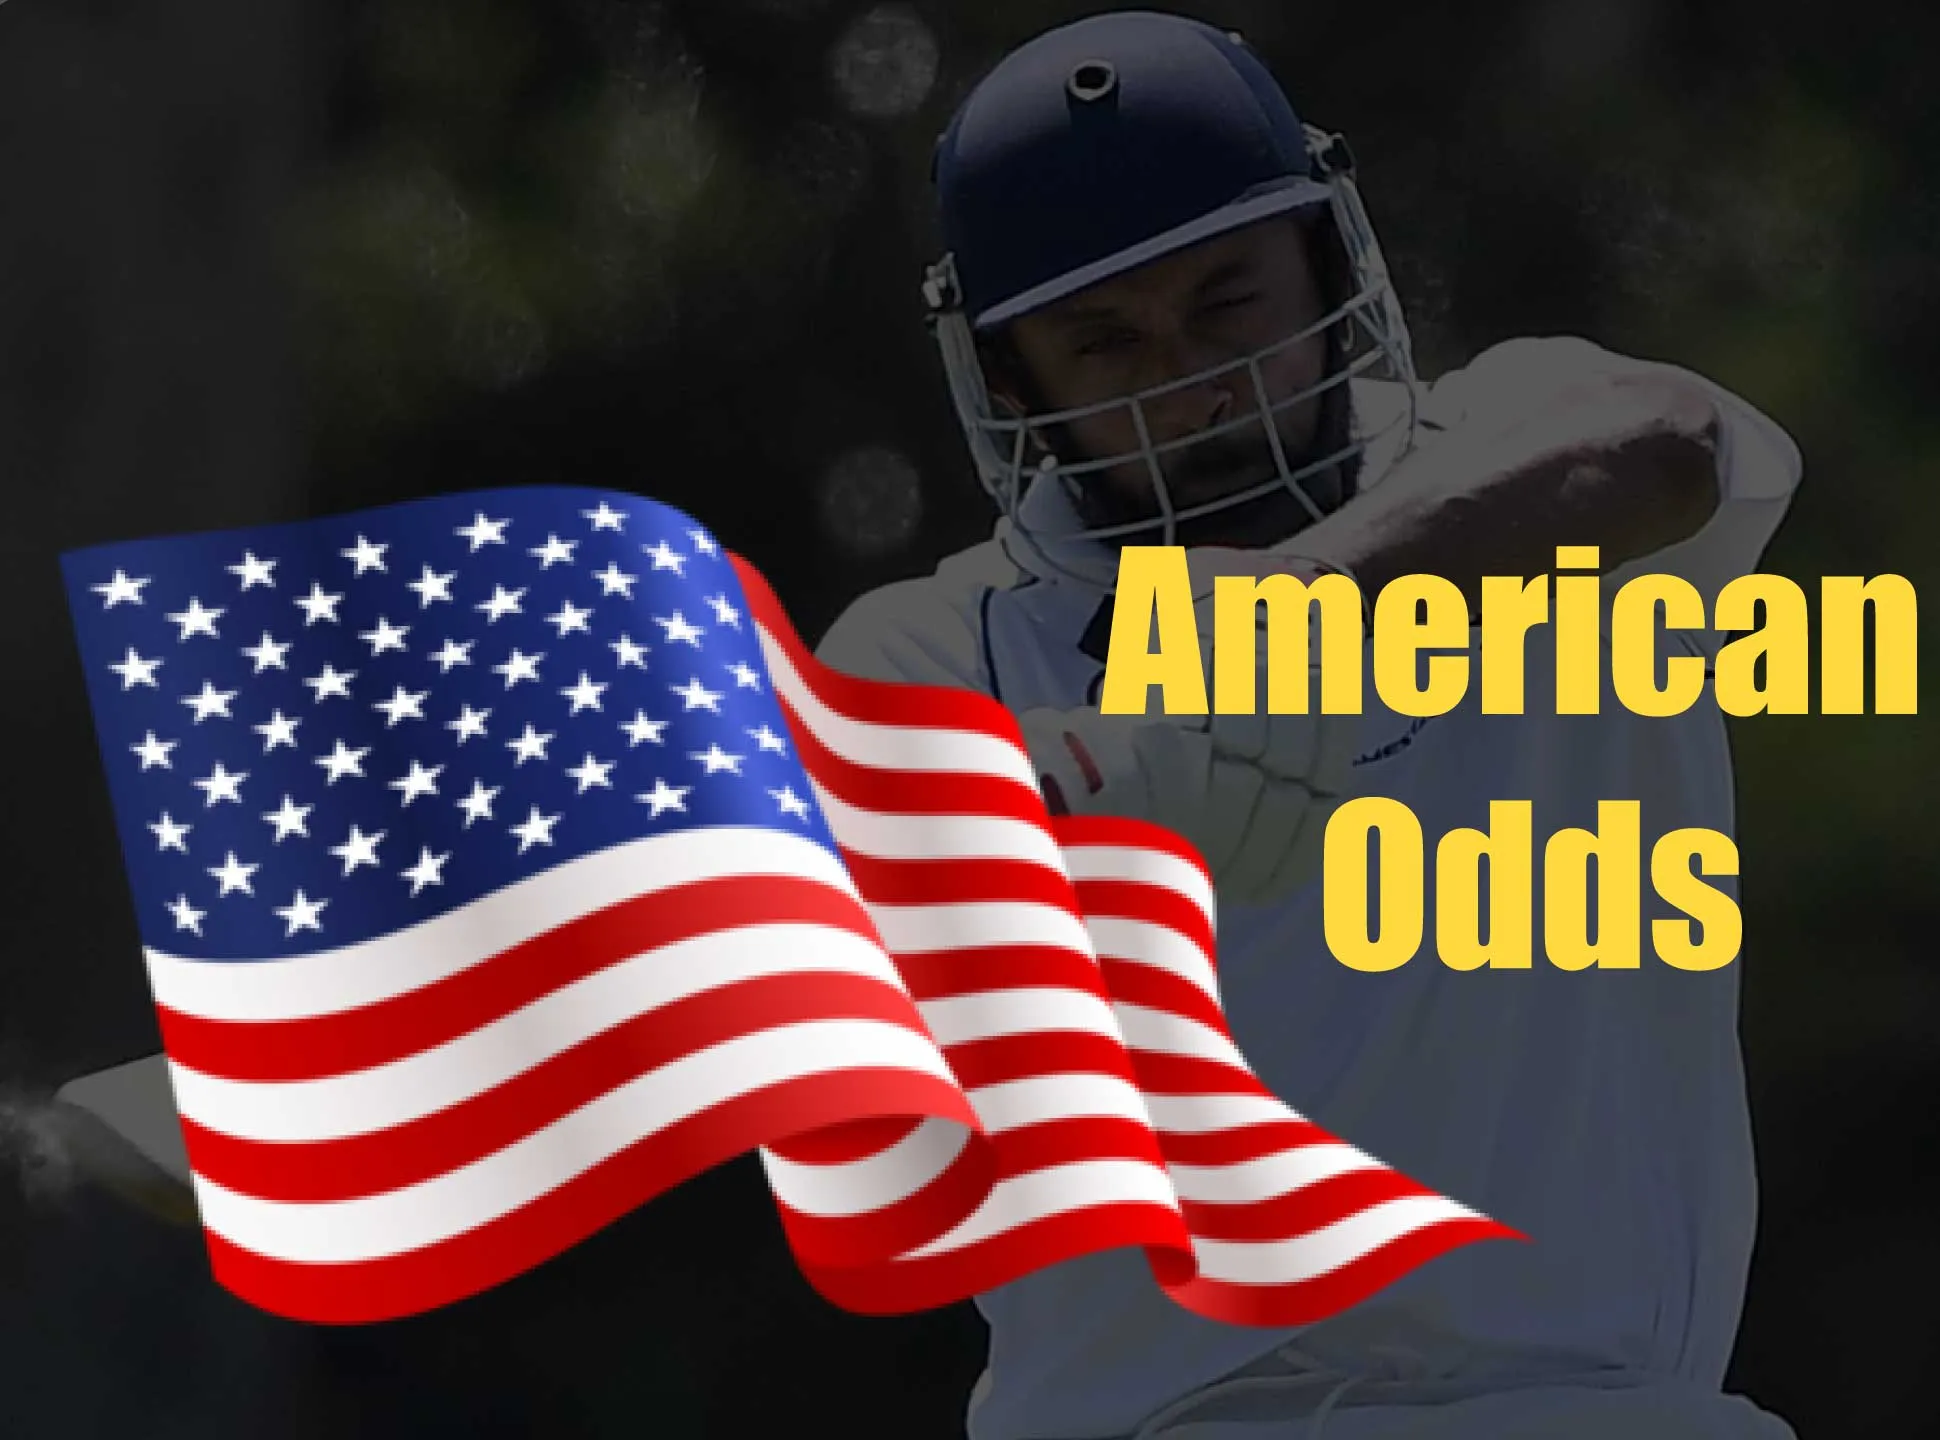 American odds are spread more among the american bettors.